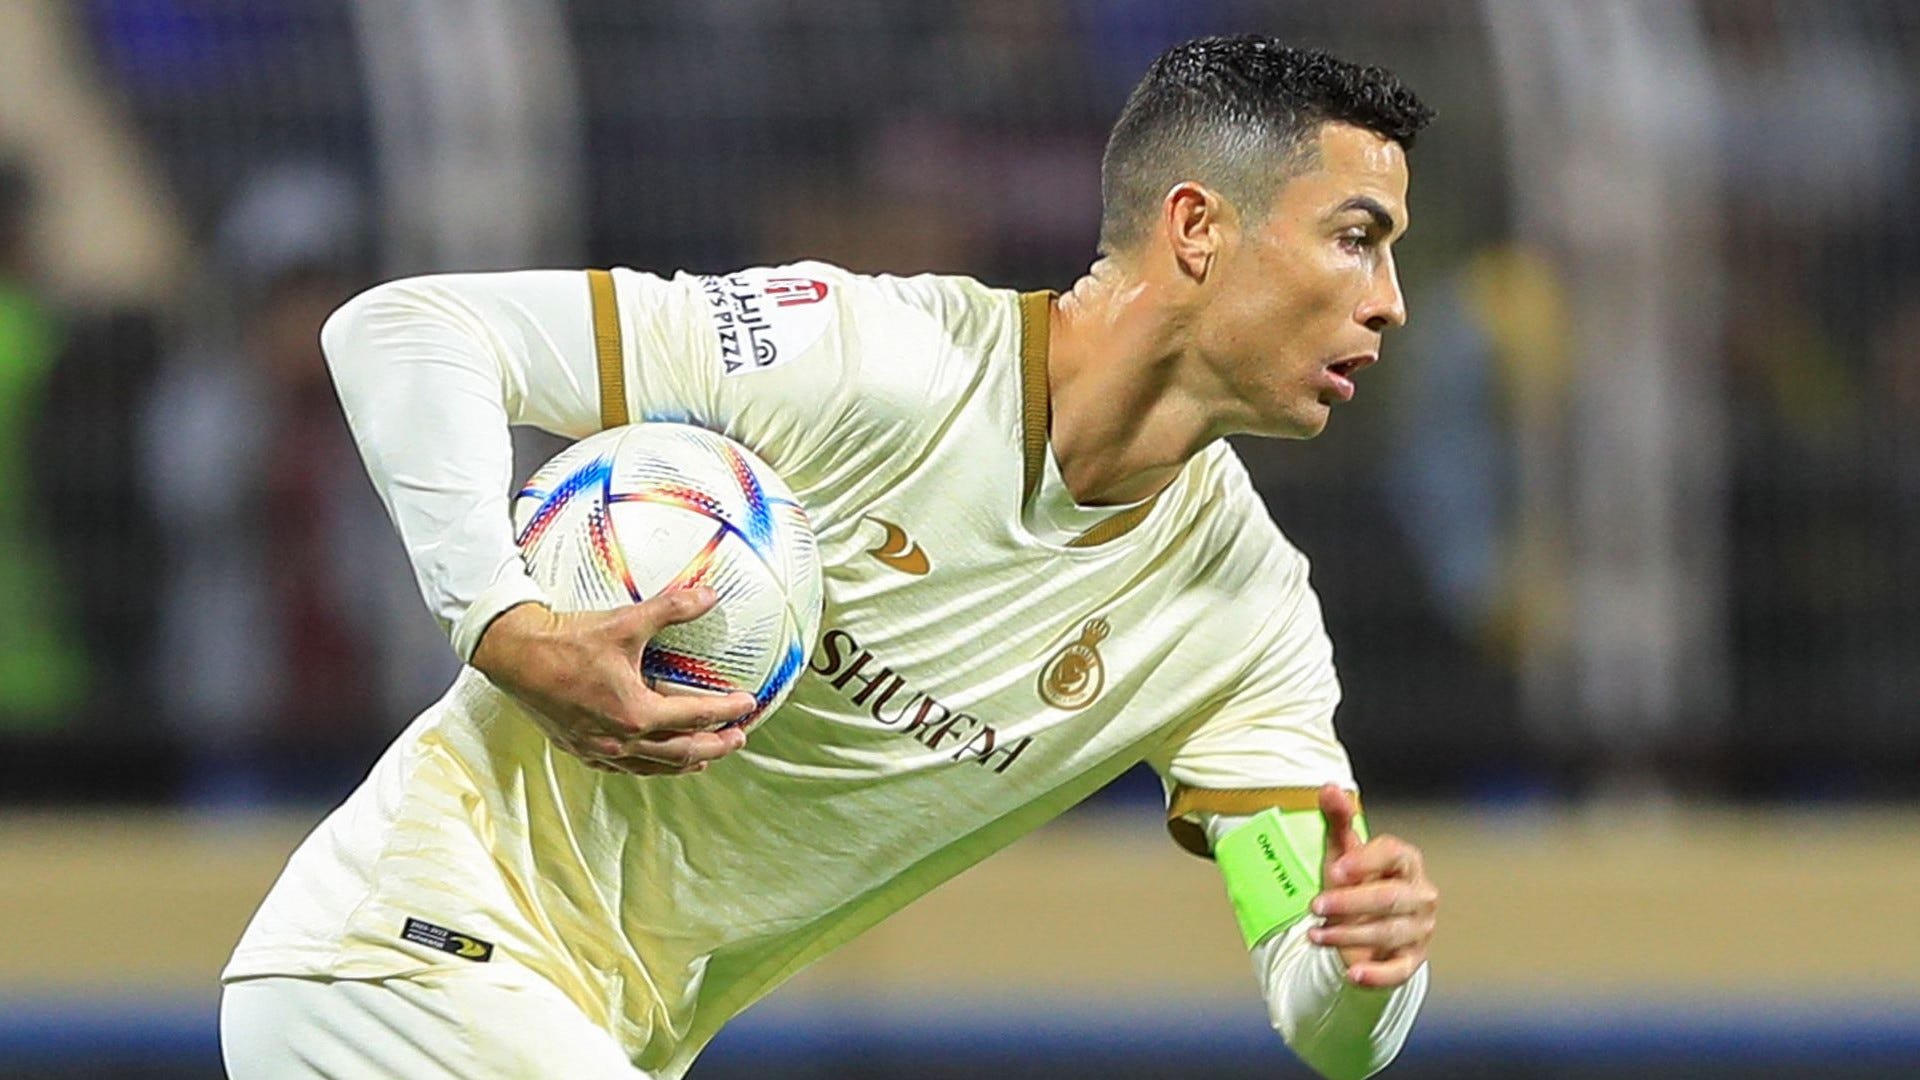 Cristiano Ronaldo reacts to his first Al-Nassr goal as penalty strike rescues his new team